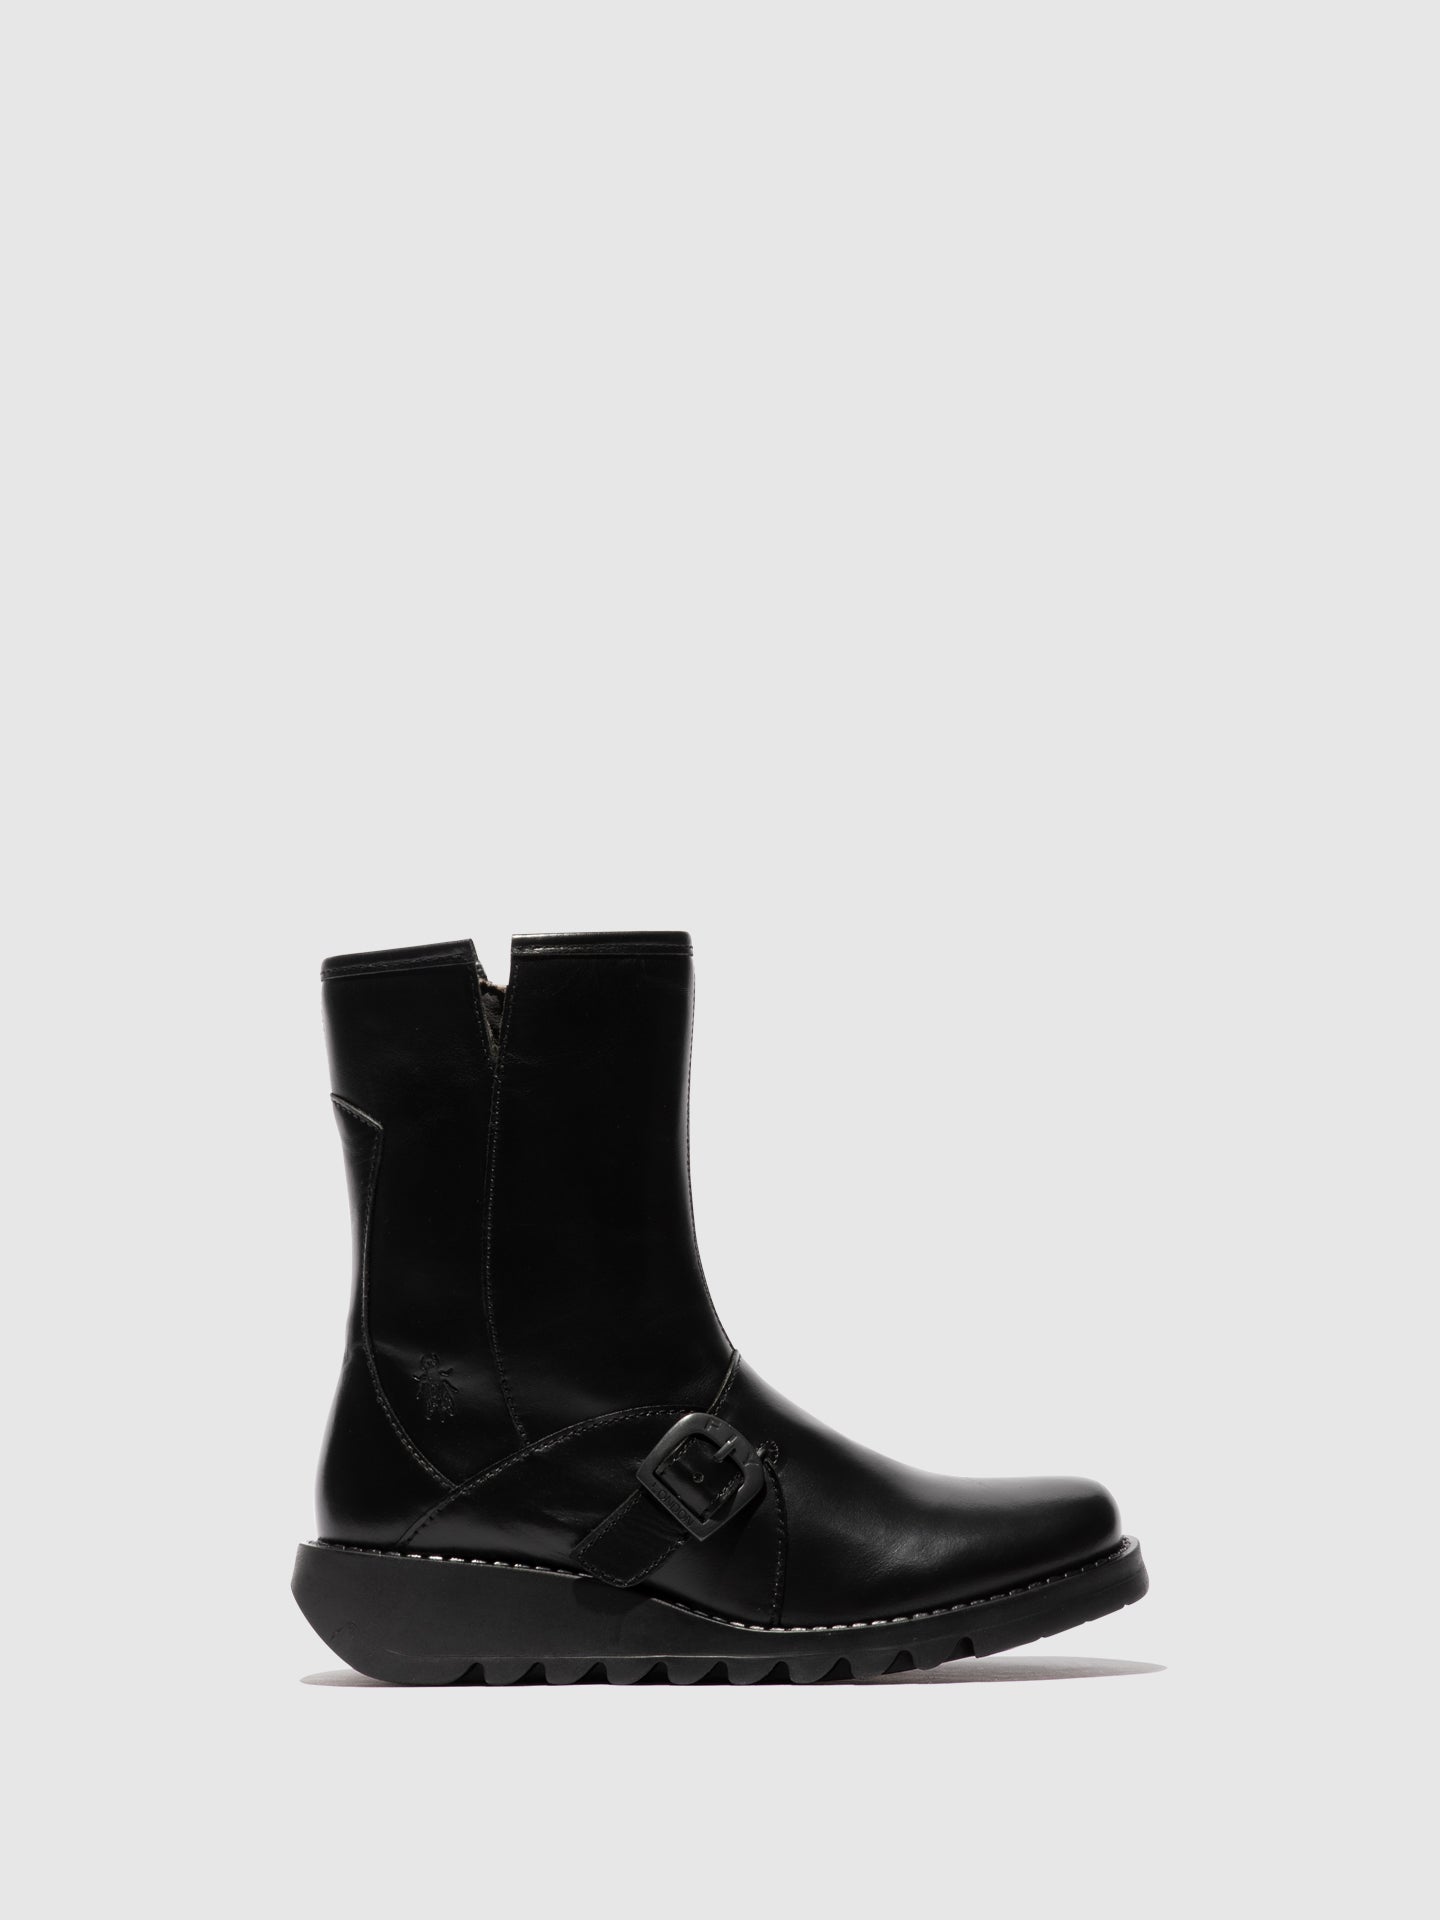 Buckle Ankle Boots SABE013FLY BLACK – Fly London EU